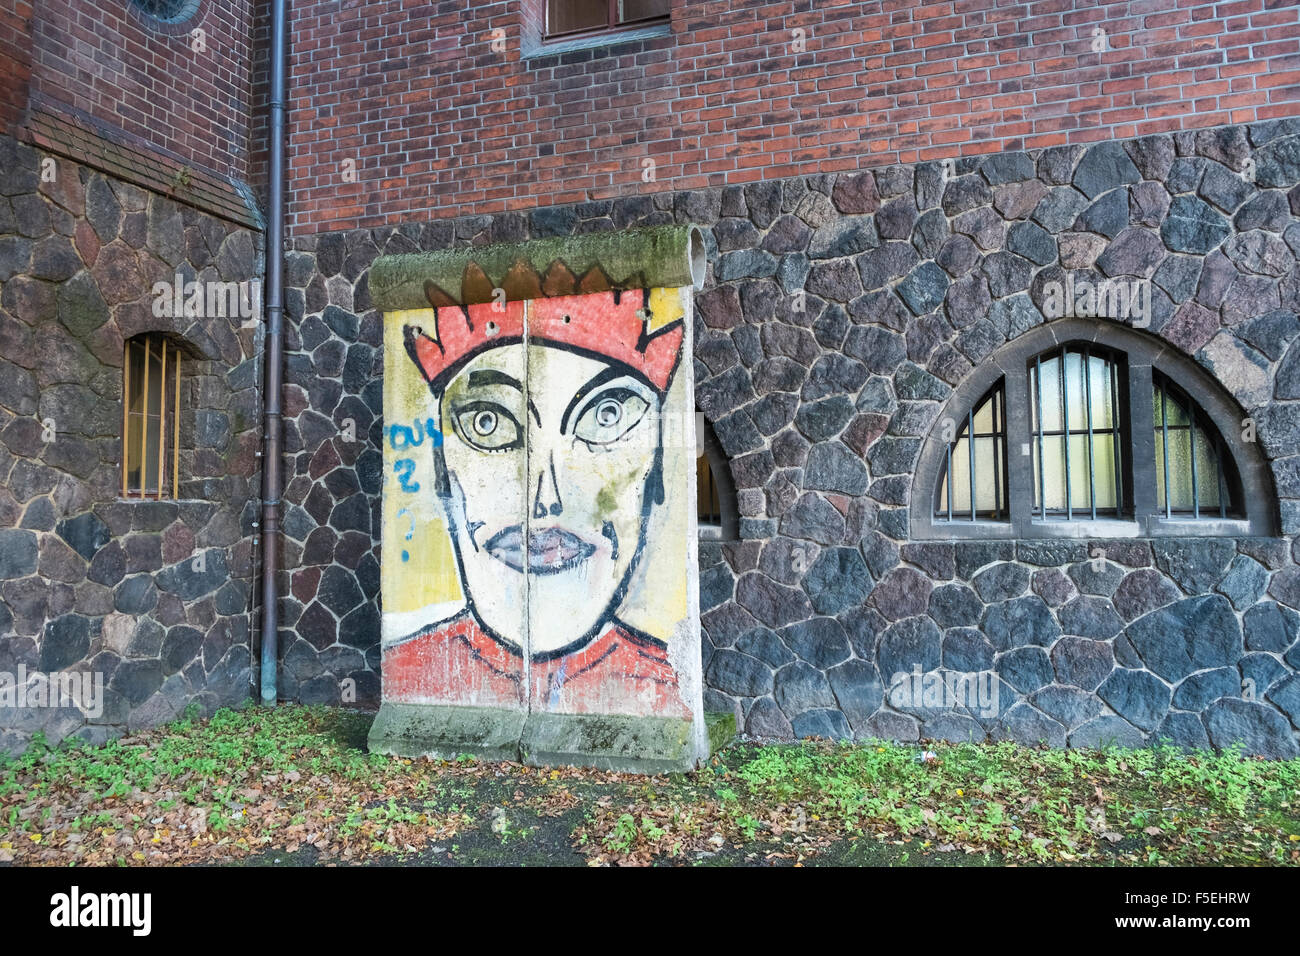 Section of the original Berlin Wall on display outside the Märkisches (Marcher) Museum, Mitte, Berlin, Germany, Europe Stock Photo